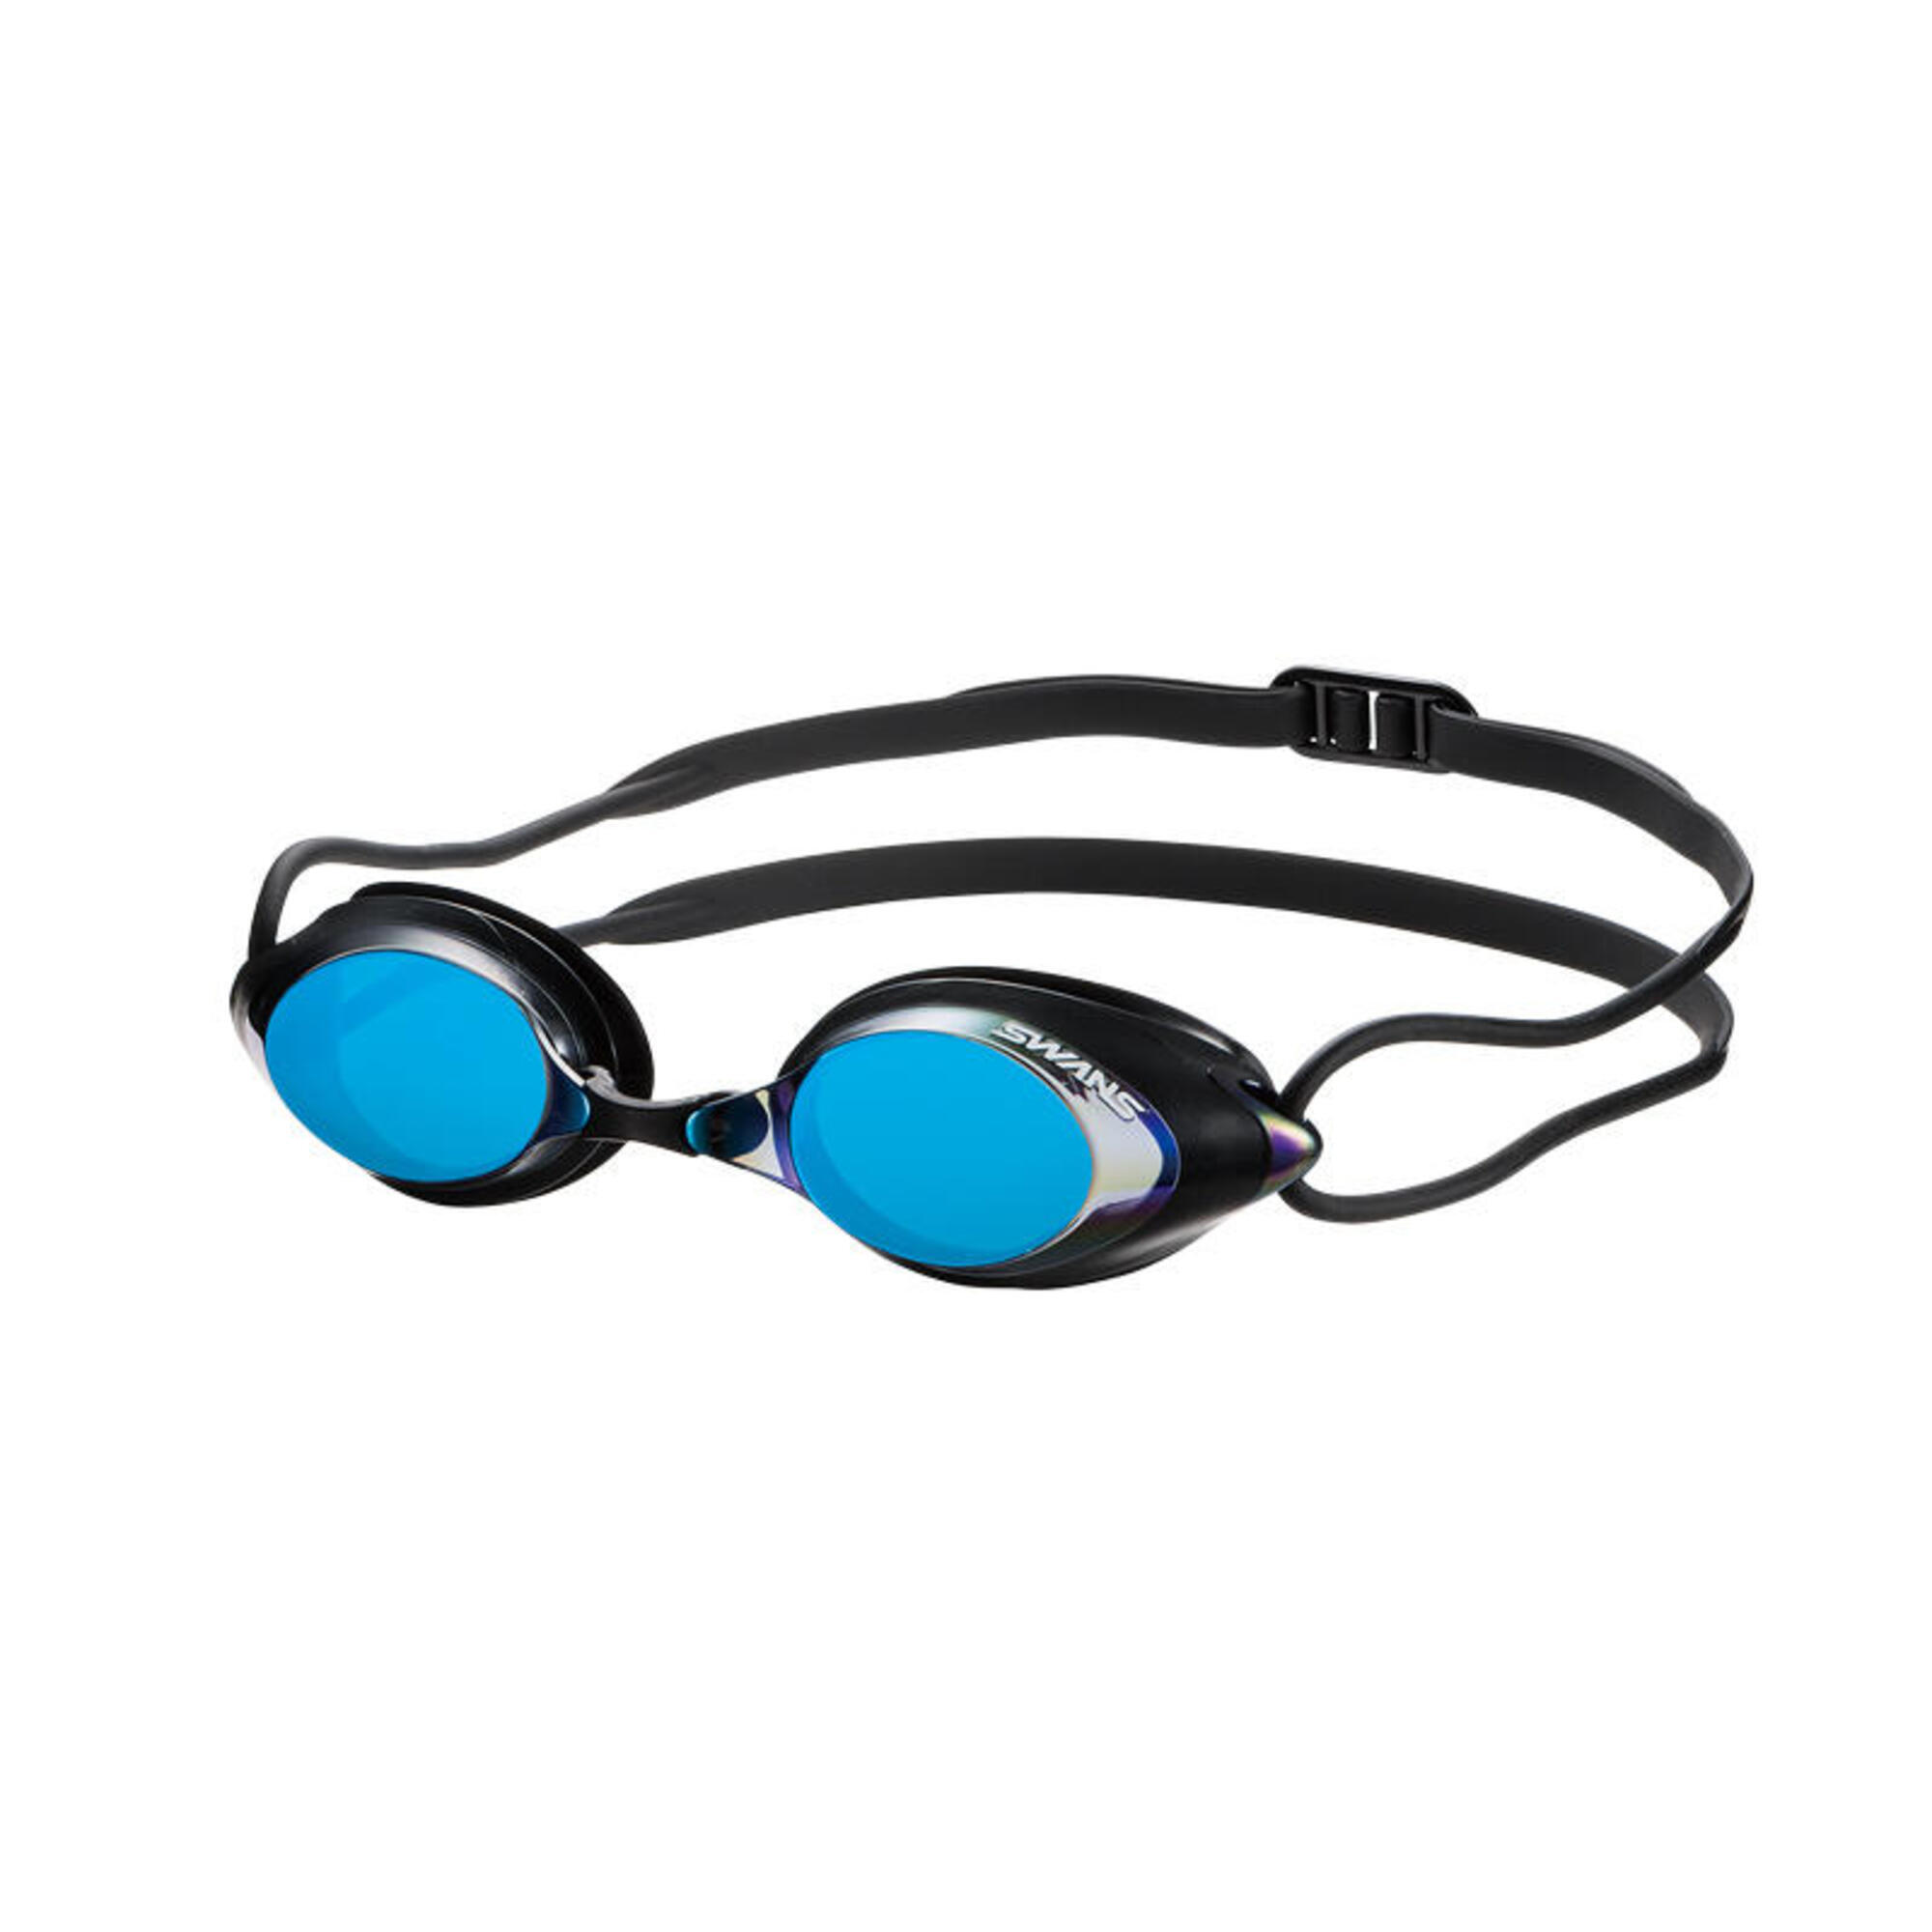 [SWN-SRXM] Mirrored Competition Swimming Goggles - Blue